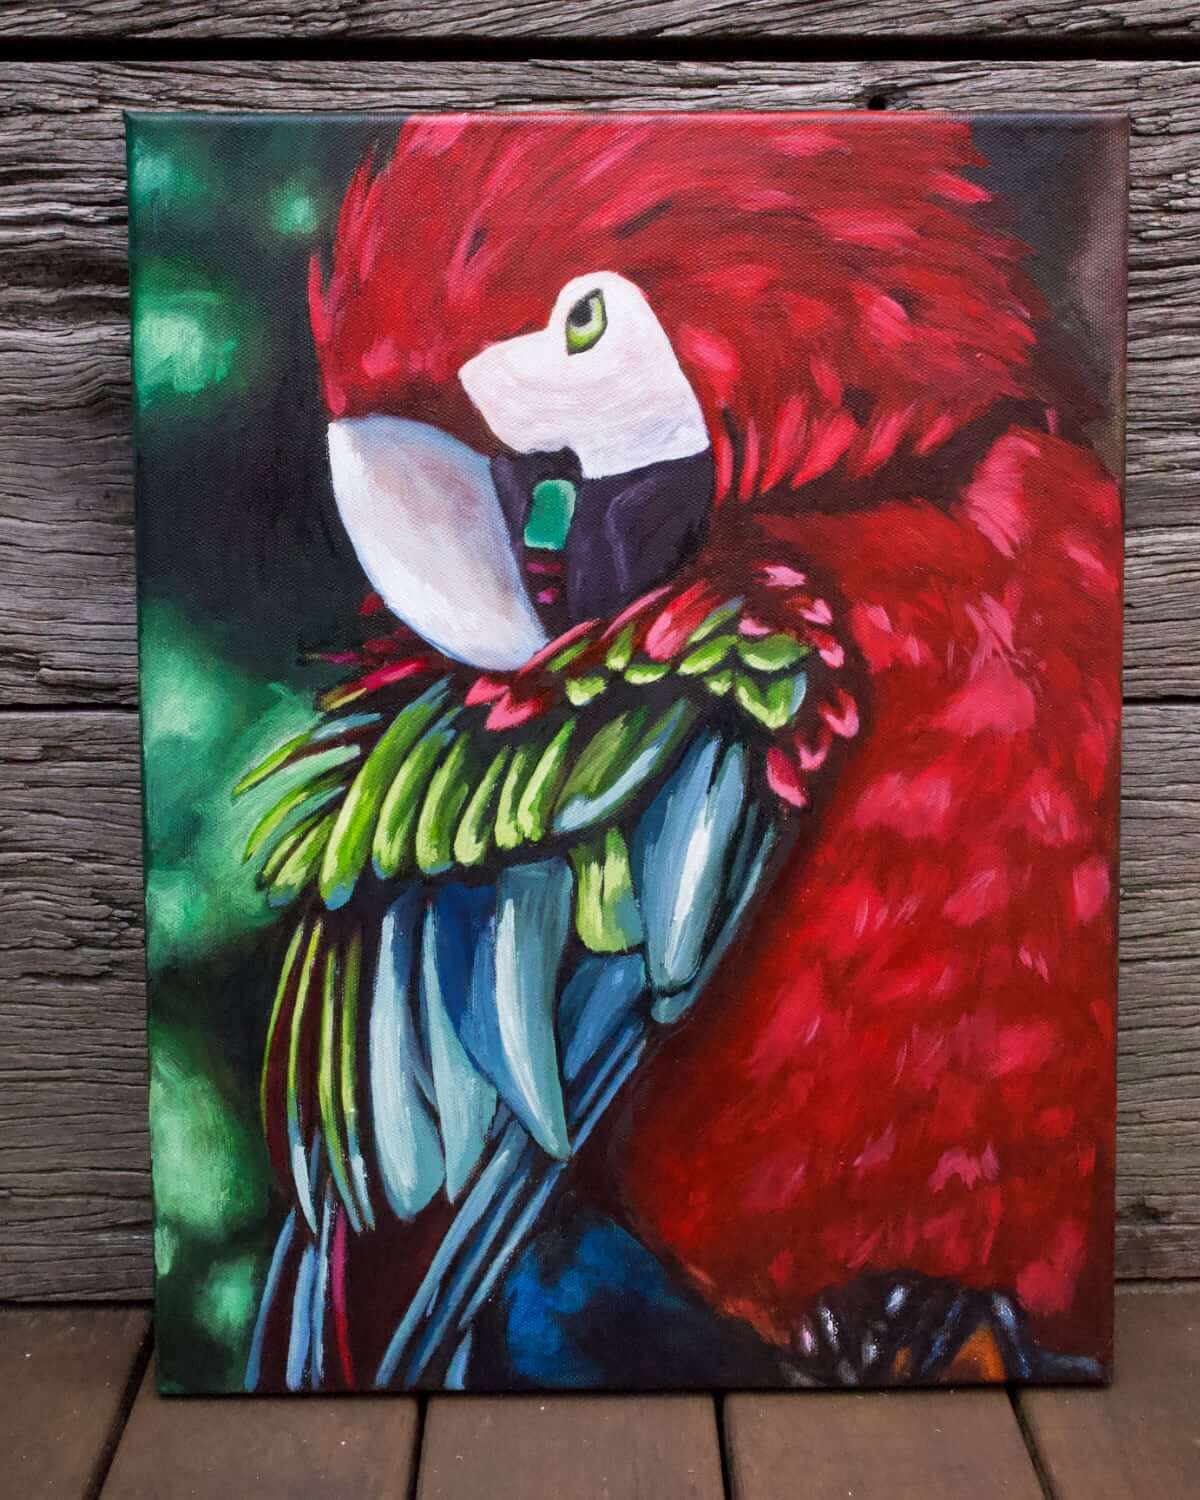 Original Oil Painting of a Colourful Parrot, Red, Blue & Green, 12" x 16" Painting on Canvas